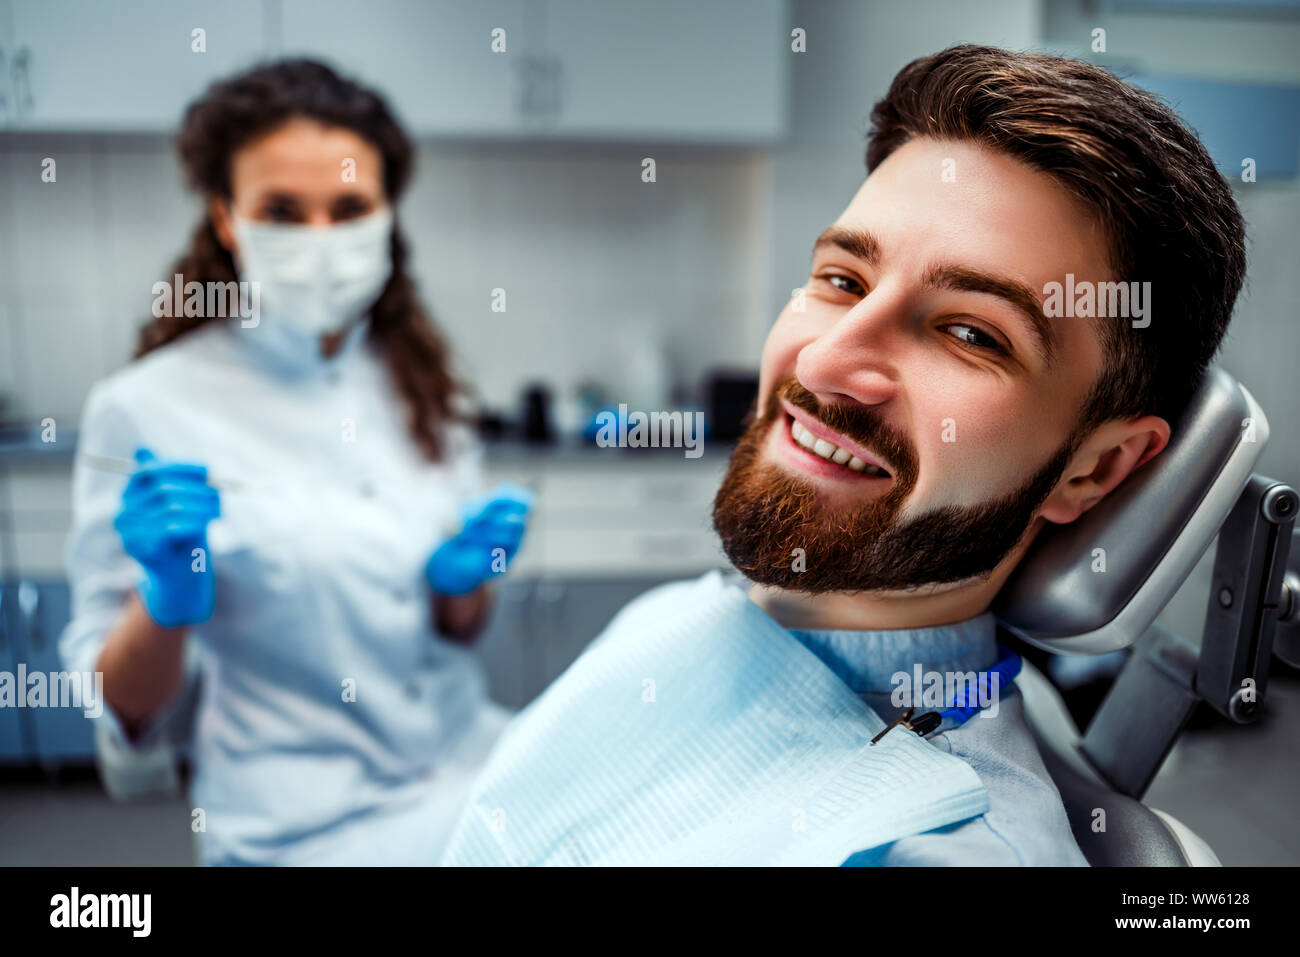 Portrait of happy patient in dental chair. Stock Photo